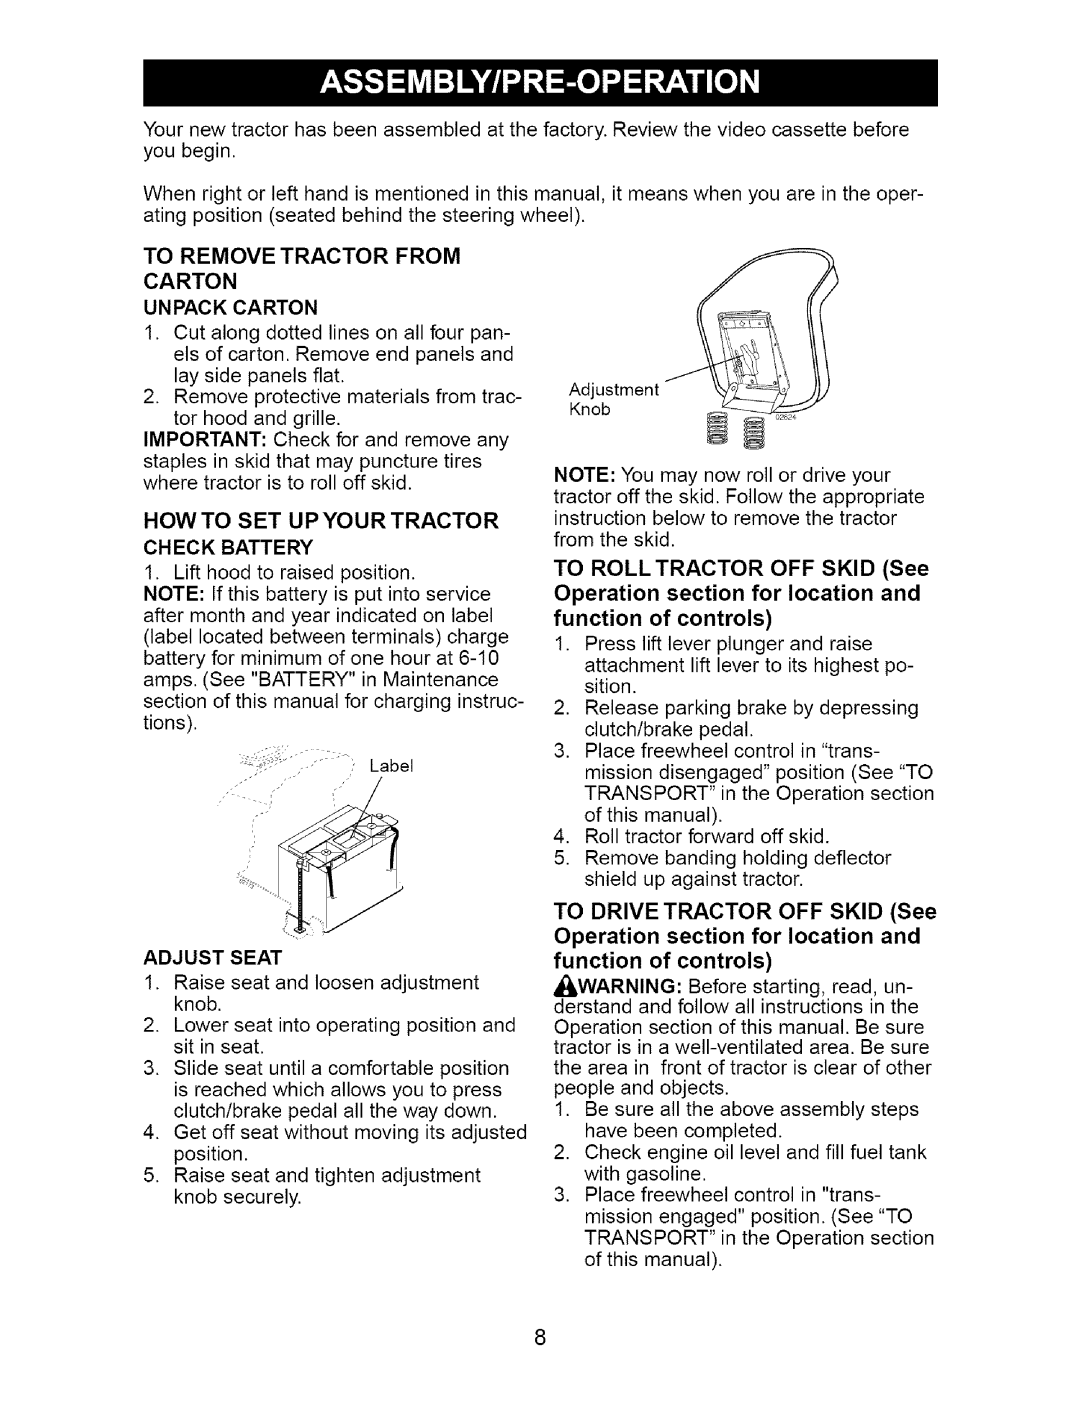 Craftsman 917.273648 manual To Remove Tractor From Carton 